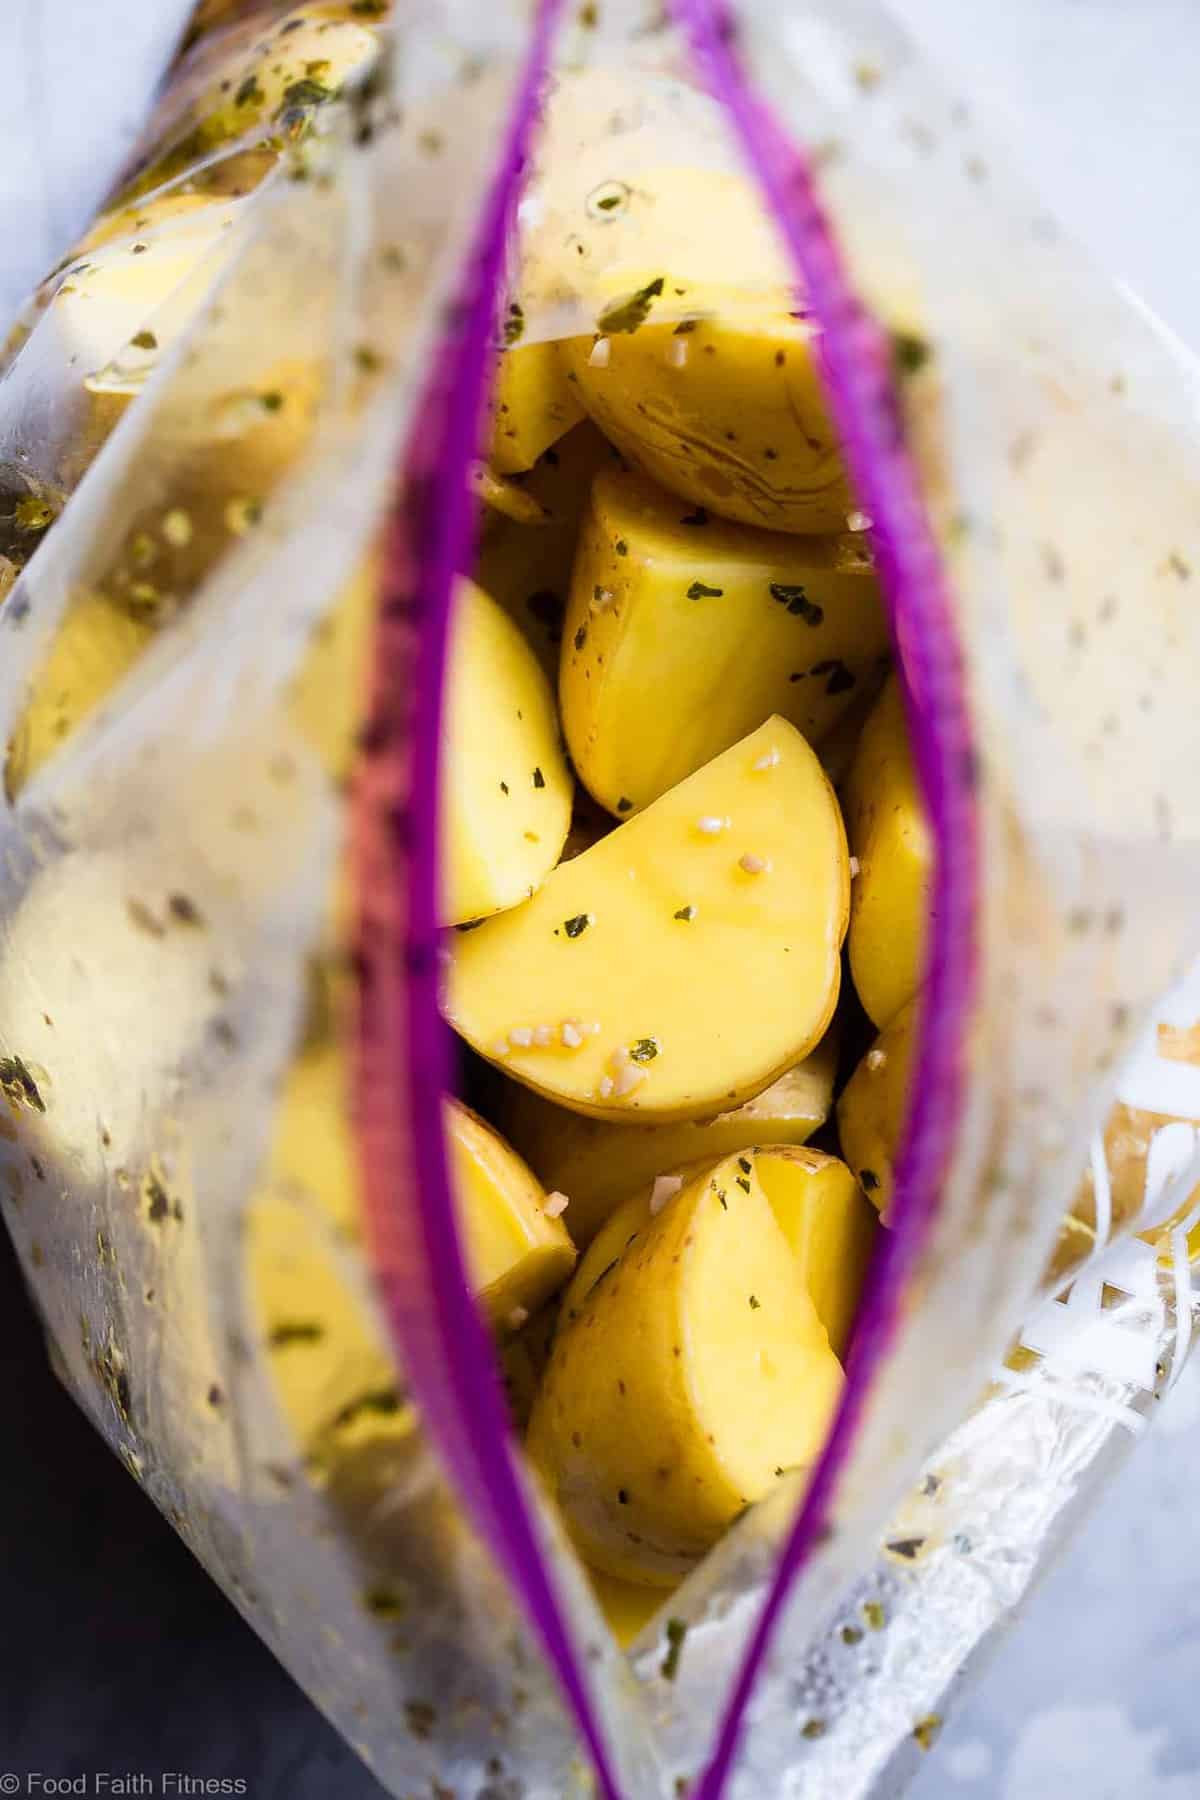 Oven Roasted Greek Lemon Potatoes - This is the BEST Greek Potatoes Recipe! Tangy, zesty and so packed with flavor you will make them all the time! SO easy, whole30 complaint and vegan/ gluten free too! | #Foodfaithfitness | #Glutenfree #Vegan #Whole30 #Healthy #Dairyfree